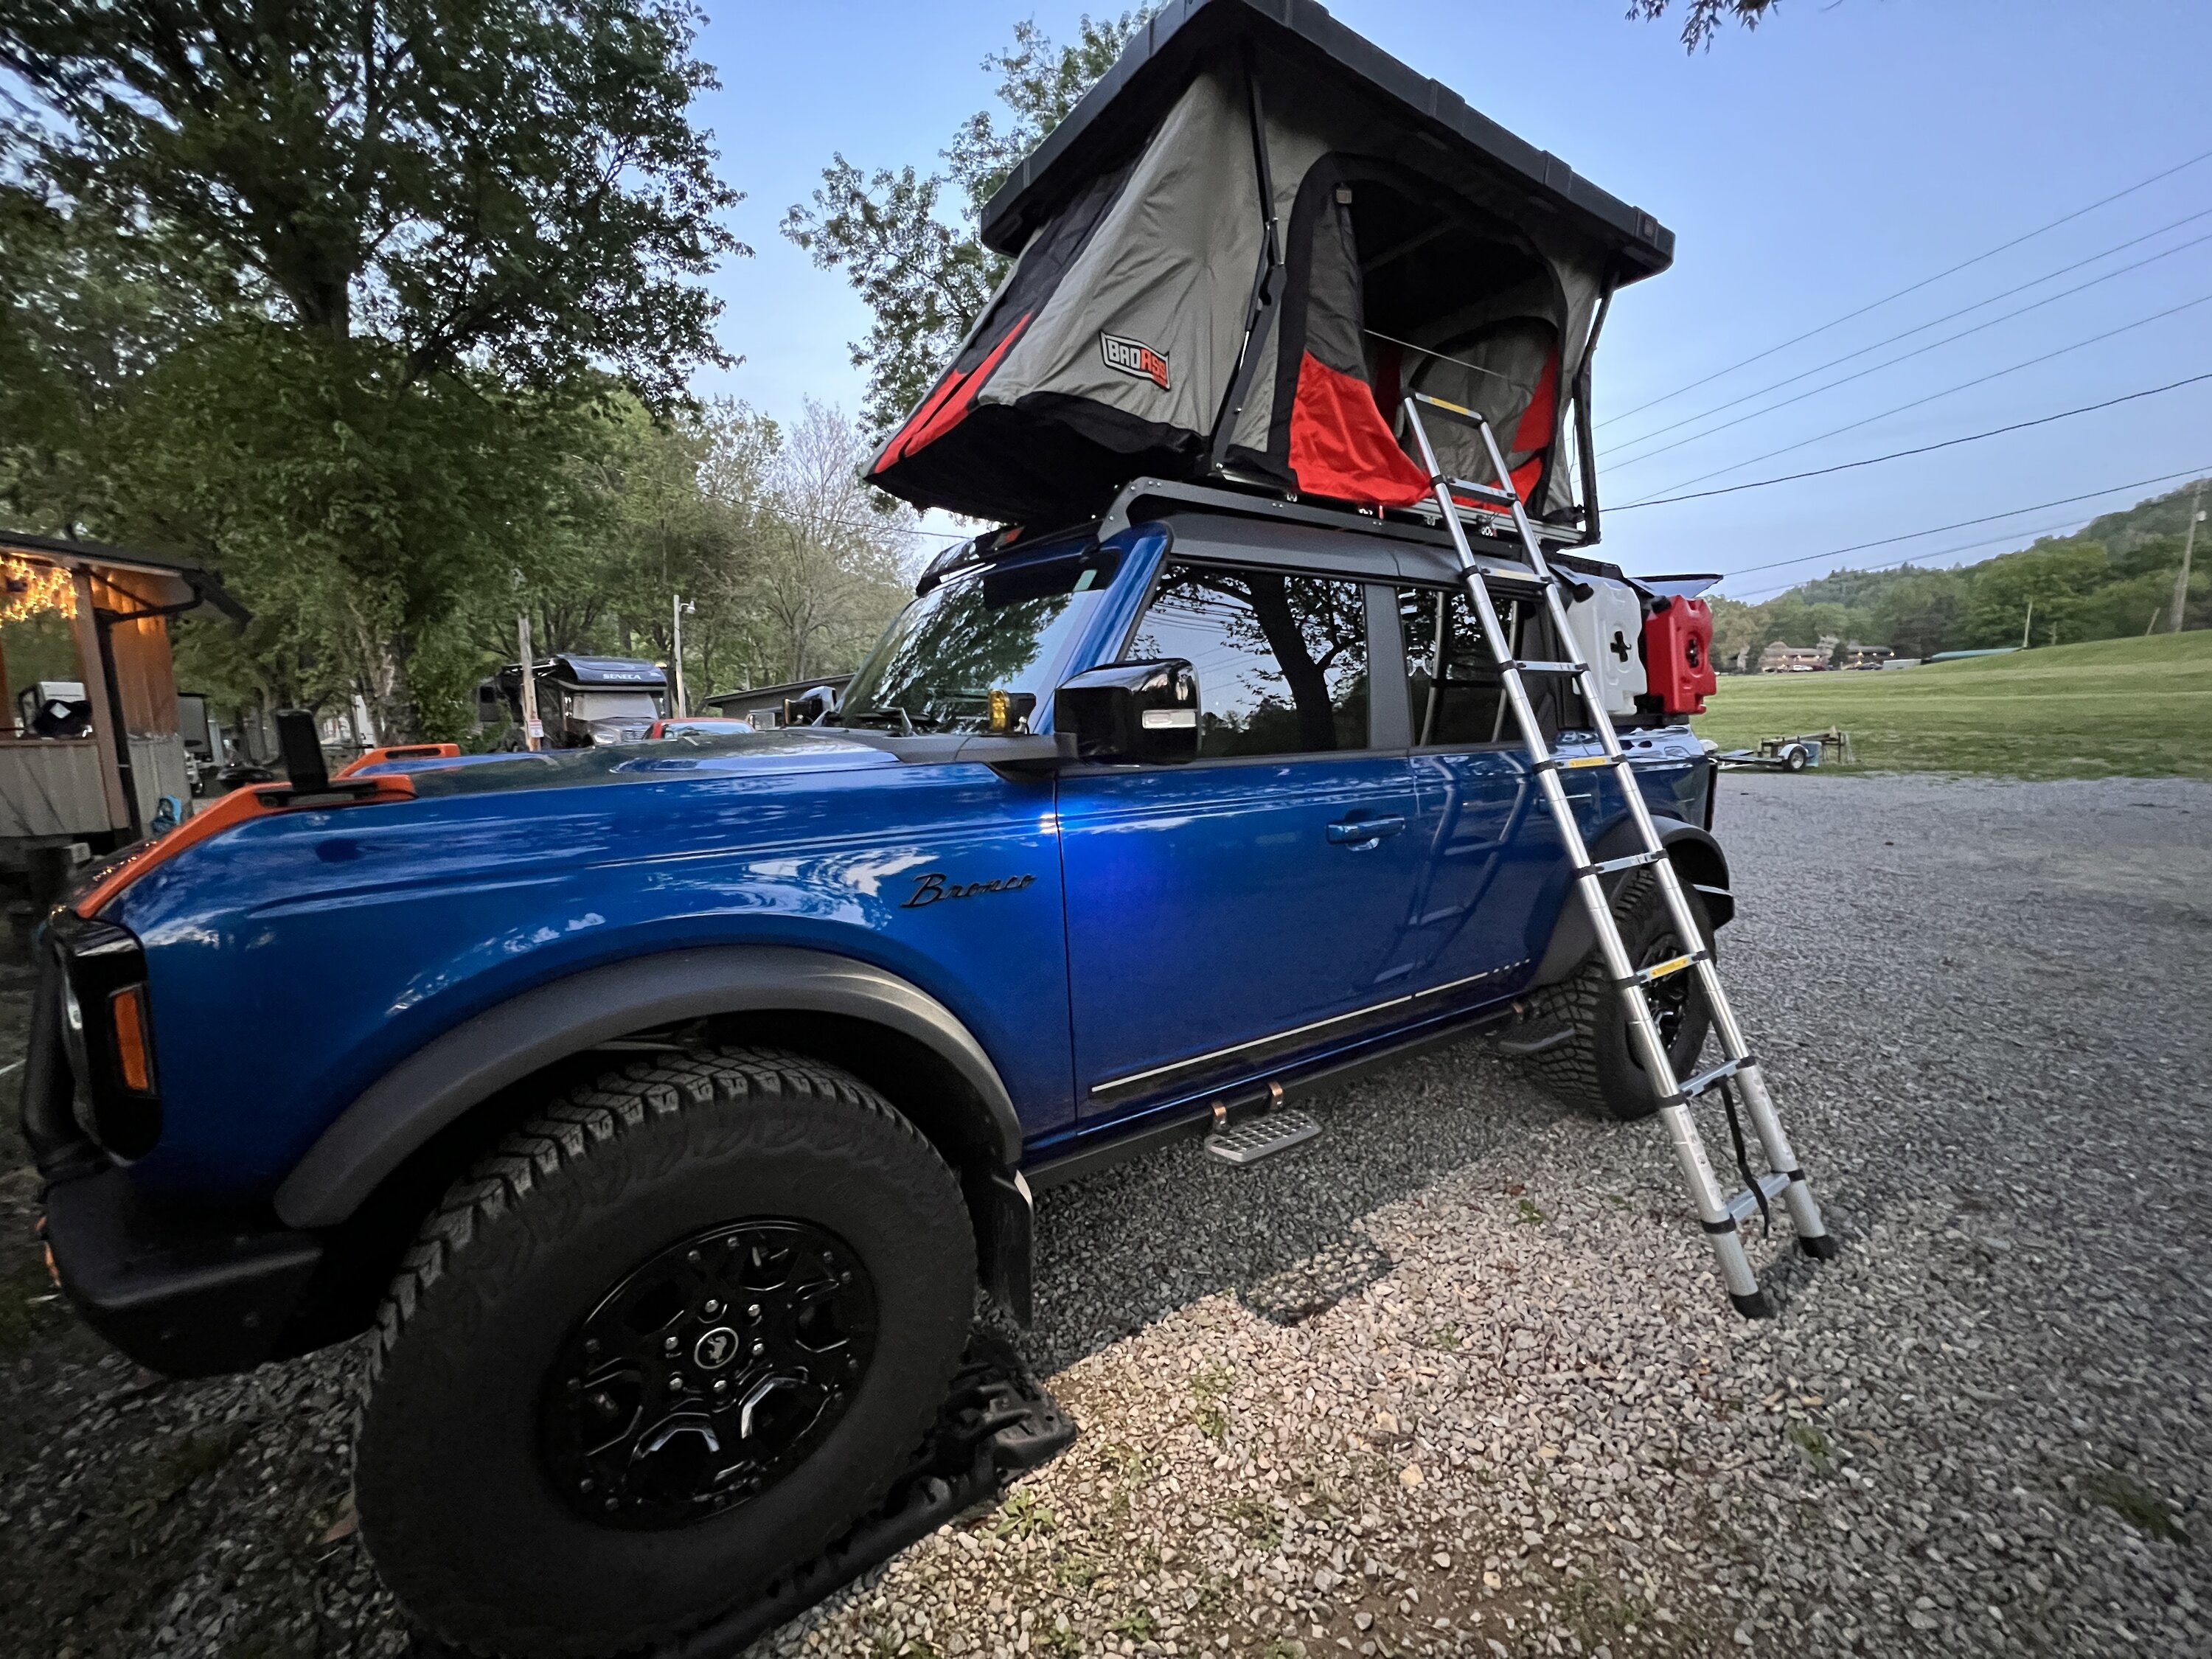 Ford Bronco Full Review w/Pics and Video: Badass Tents Roof Rack IMG_1878